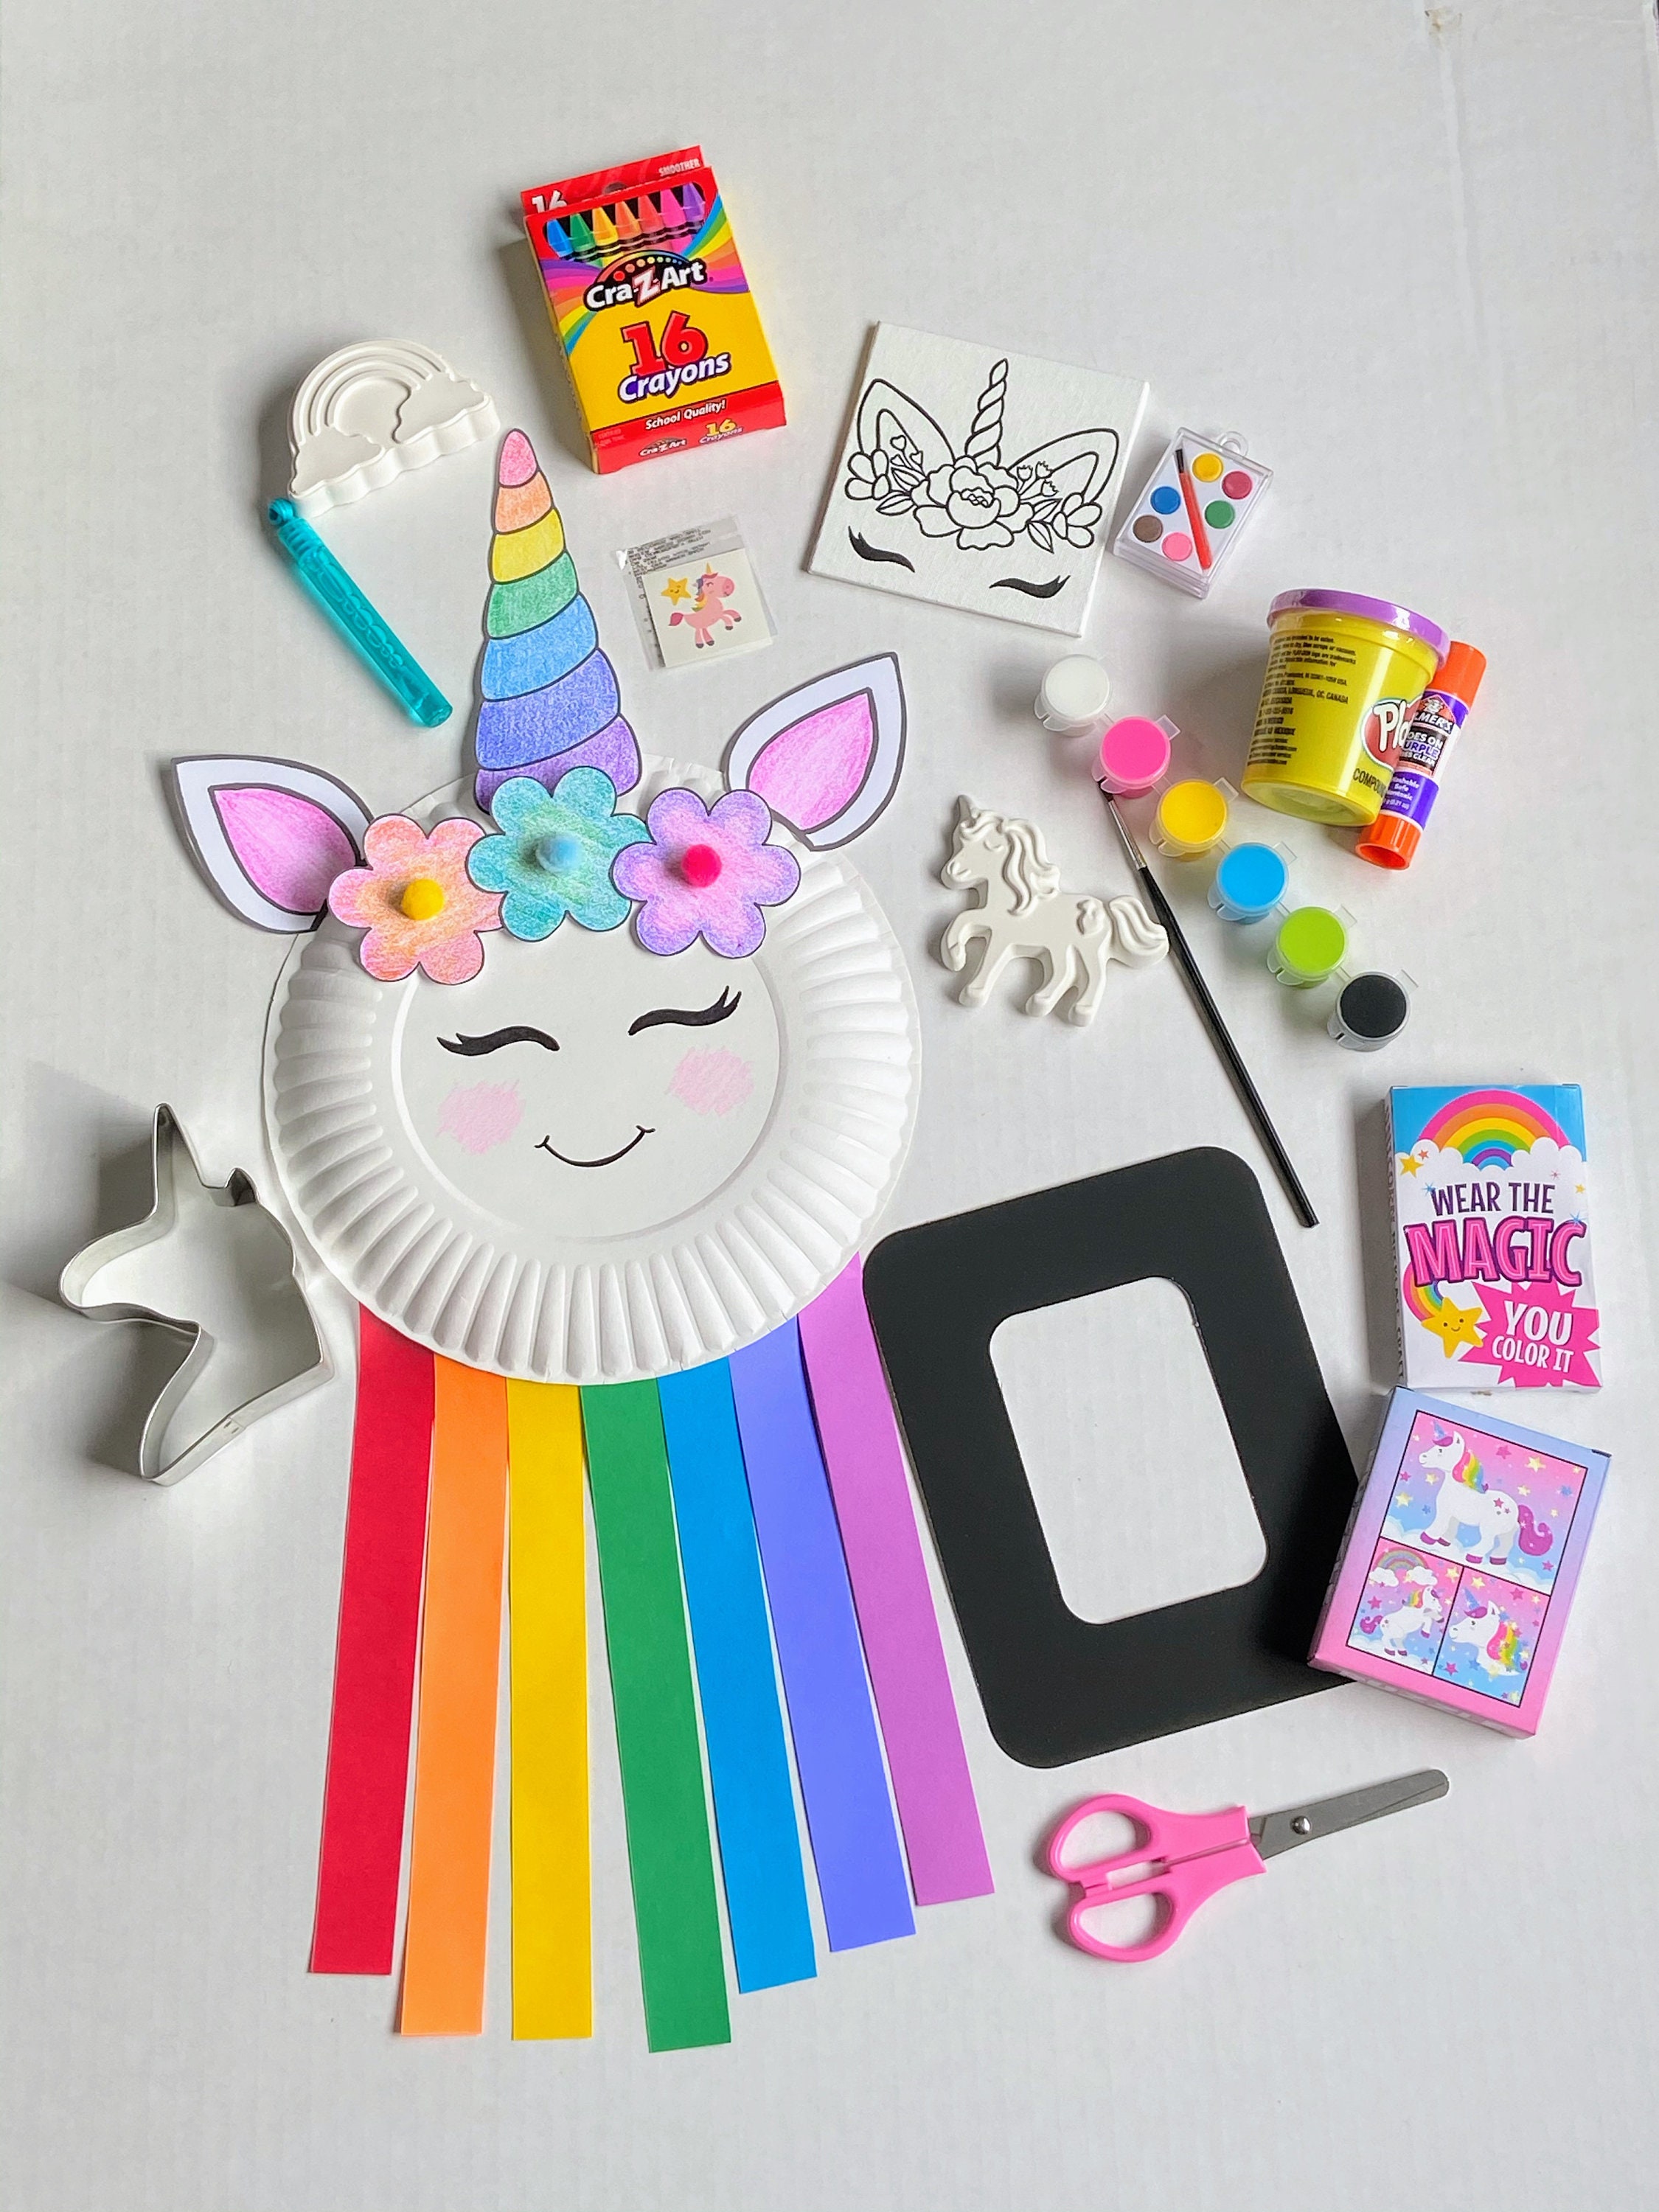 It's So Me! Paint Your Own Unicorns – DIY Ceramic Unicorn Kit – Arts and  Crafts Kits- Great Birthday Party Activities for Kids Ages 6, 7, 8, 9